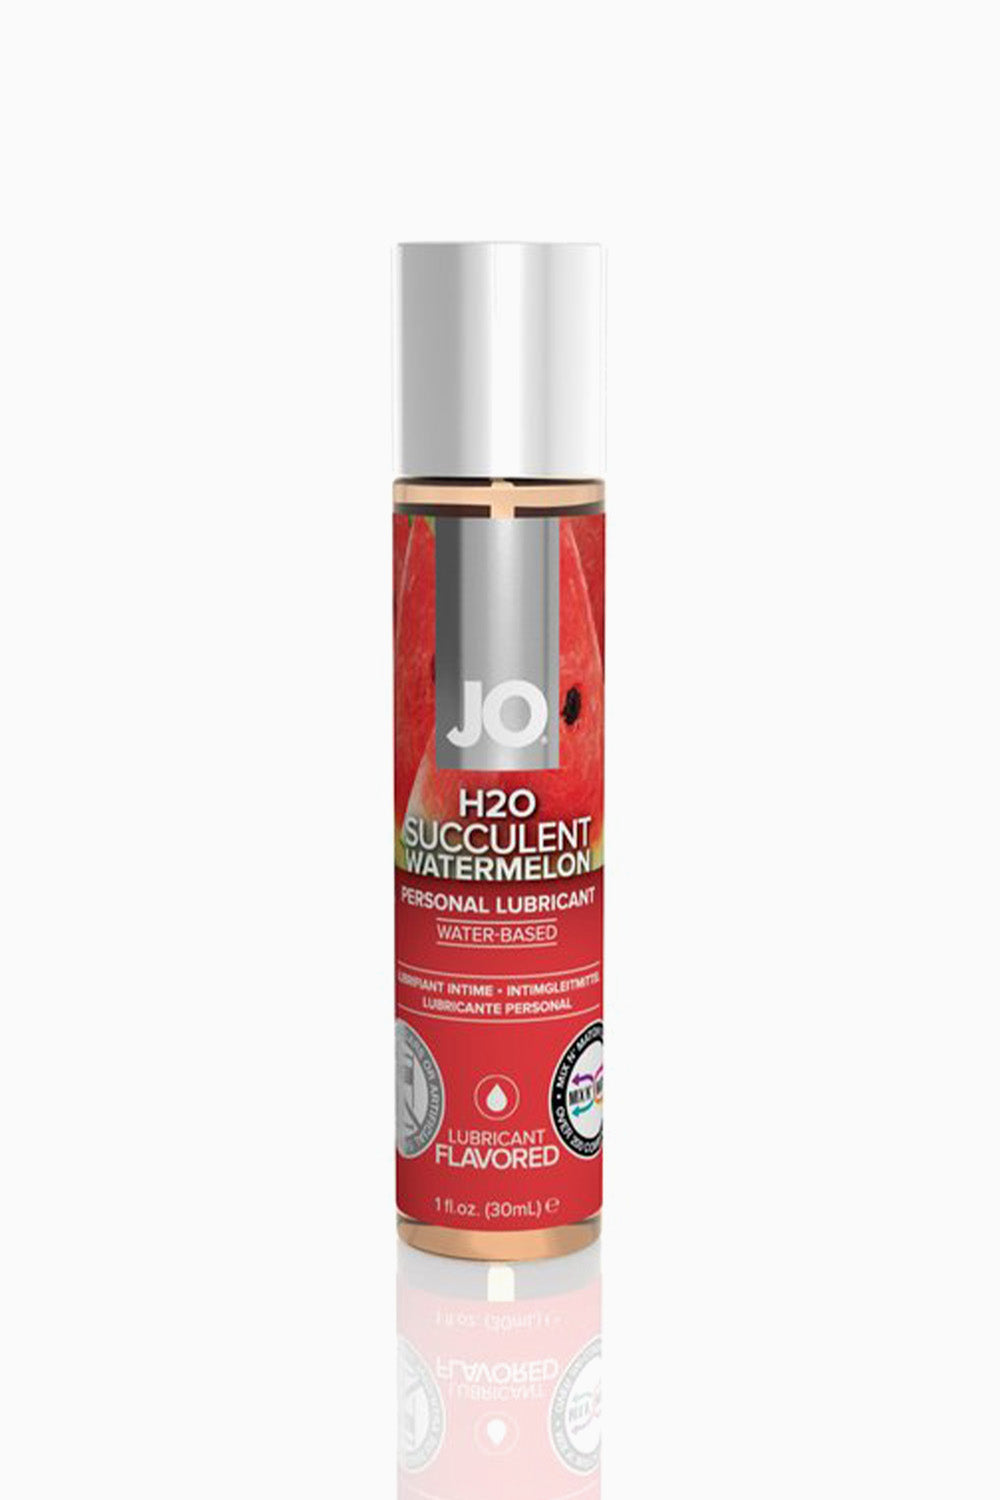 System JO H2O Water Based Watermelon Lubricant 30ml